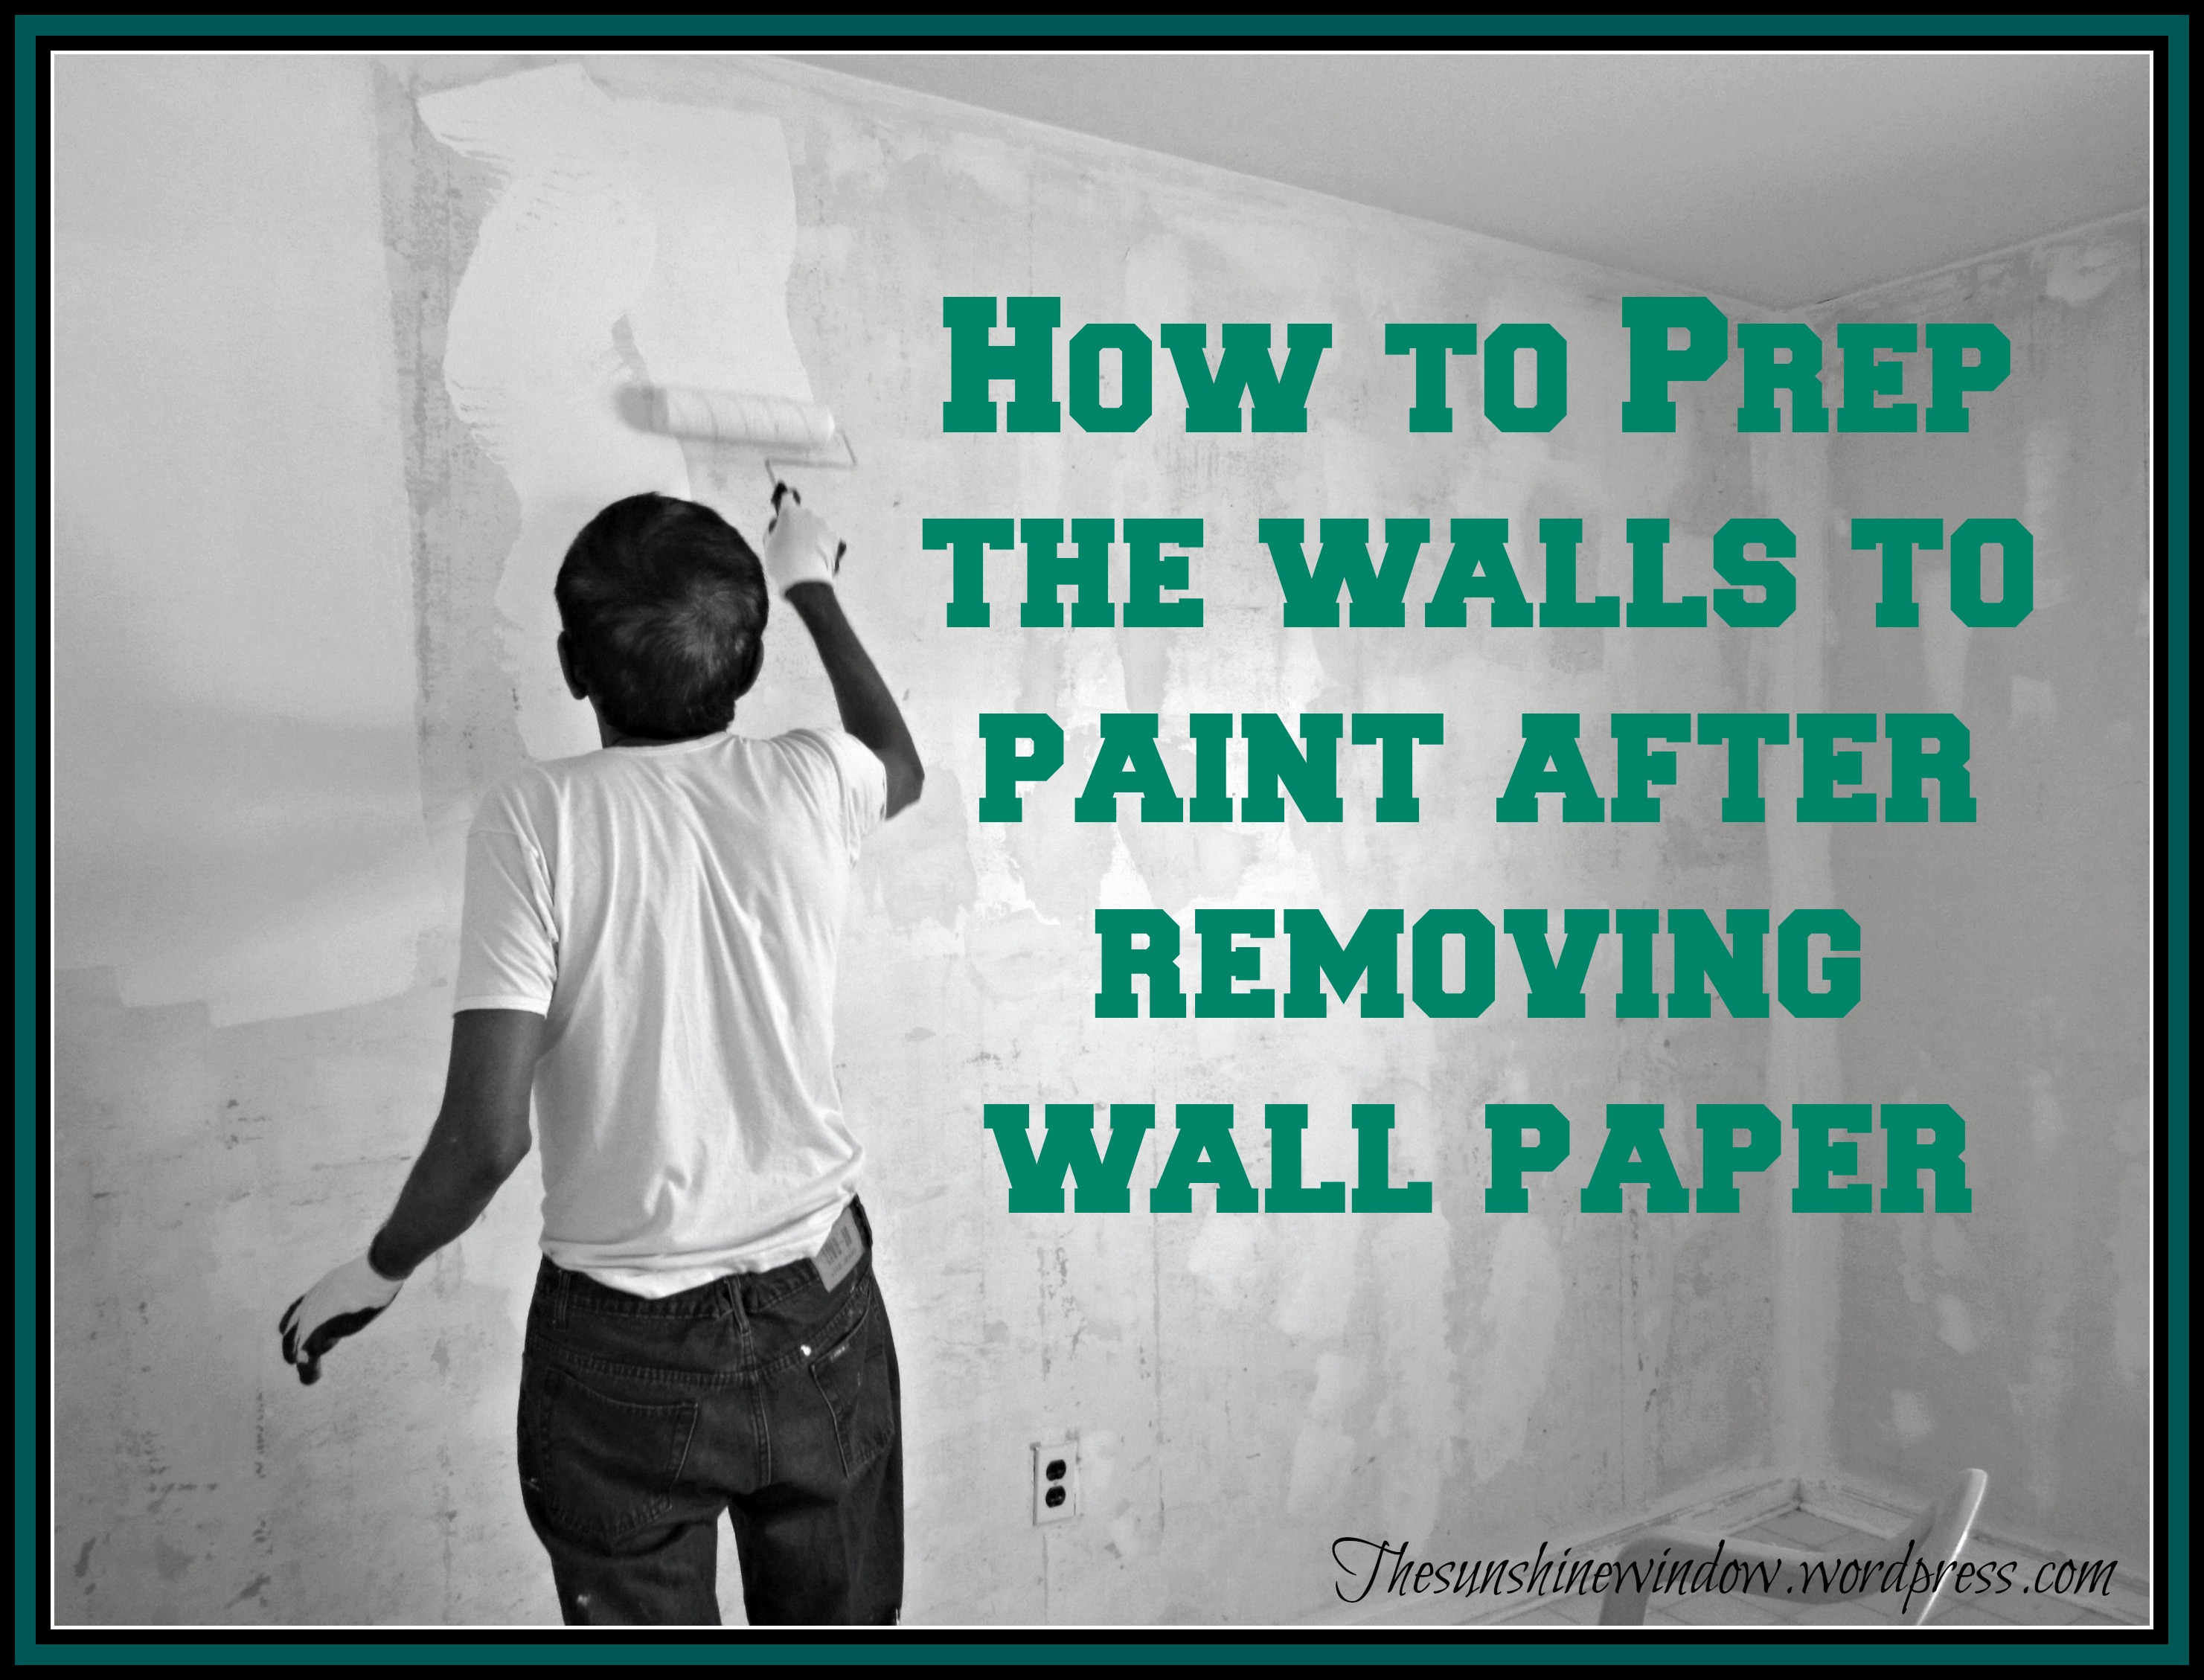 28+] Remove Wallpaper and Paint Walls